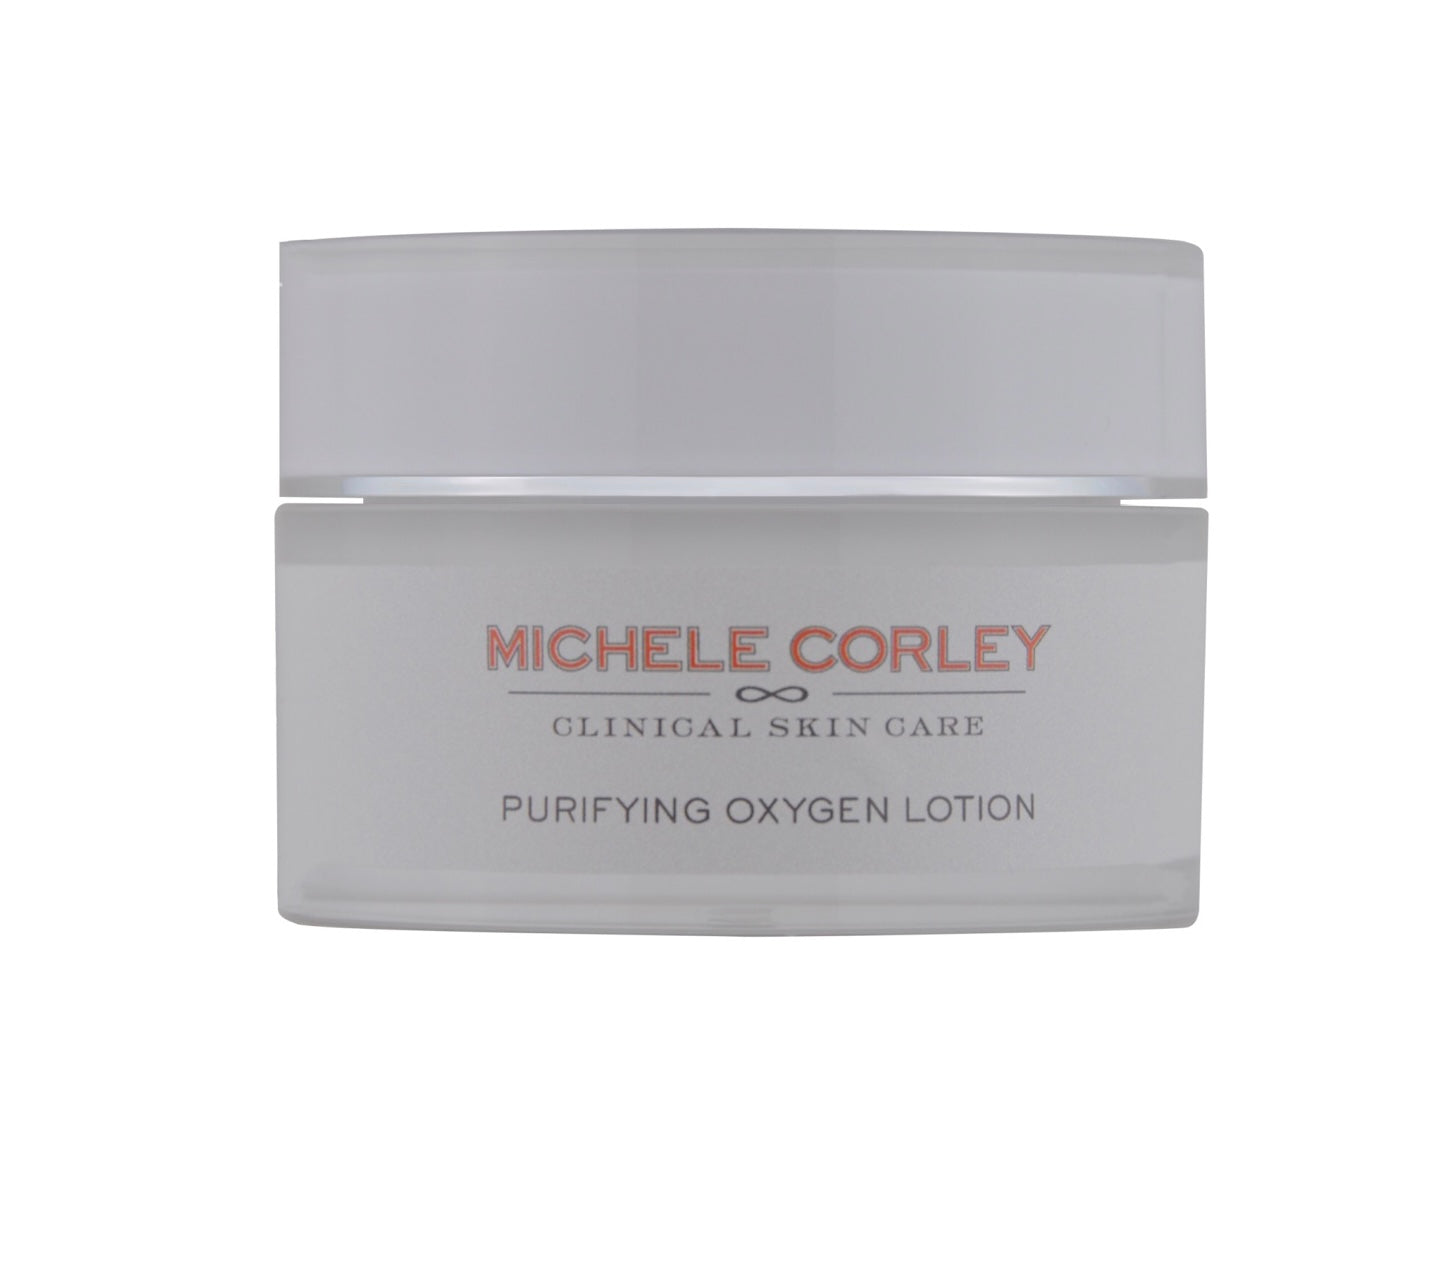 Purifying Oxygen Lotion